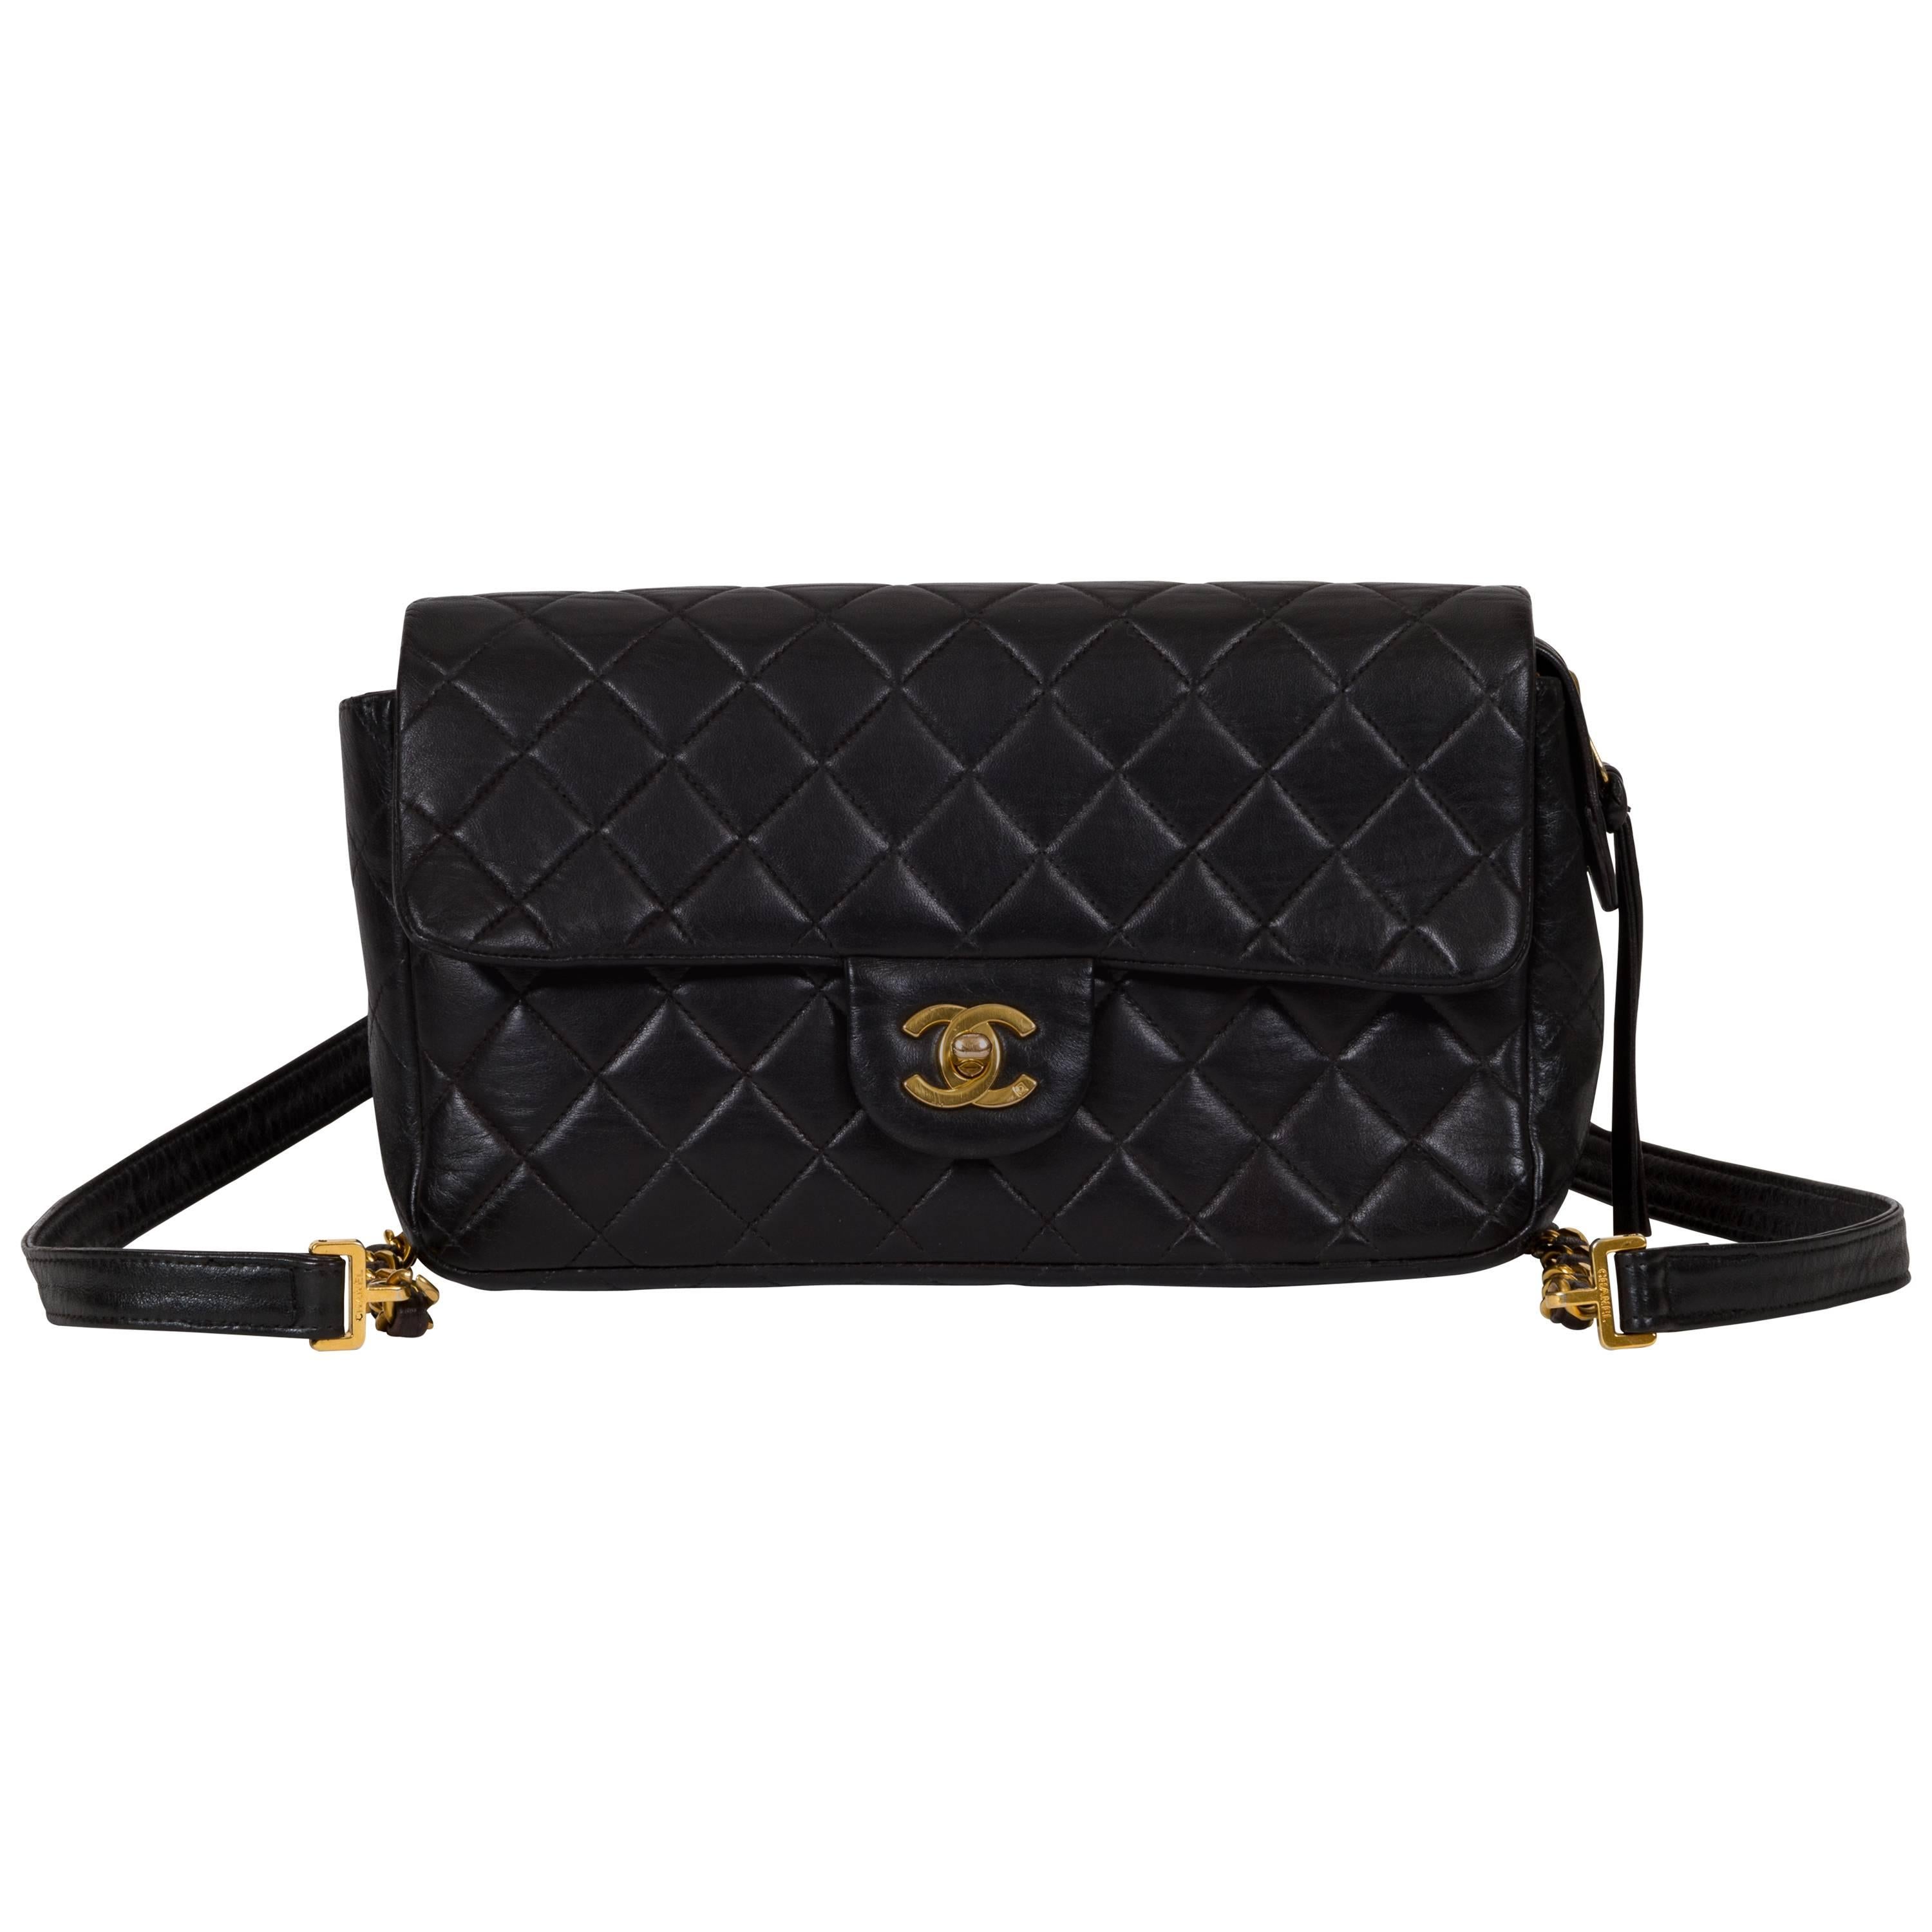 Chanel Quilted Black Lambskin Backpack Bag